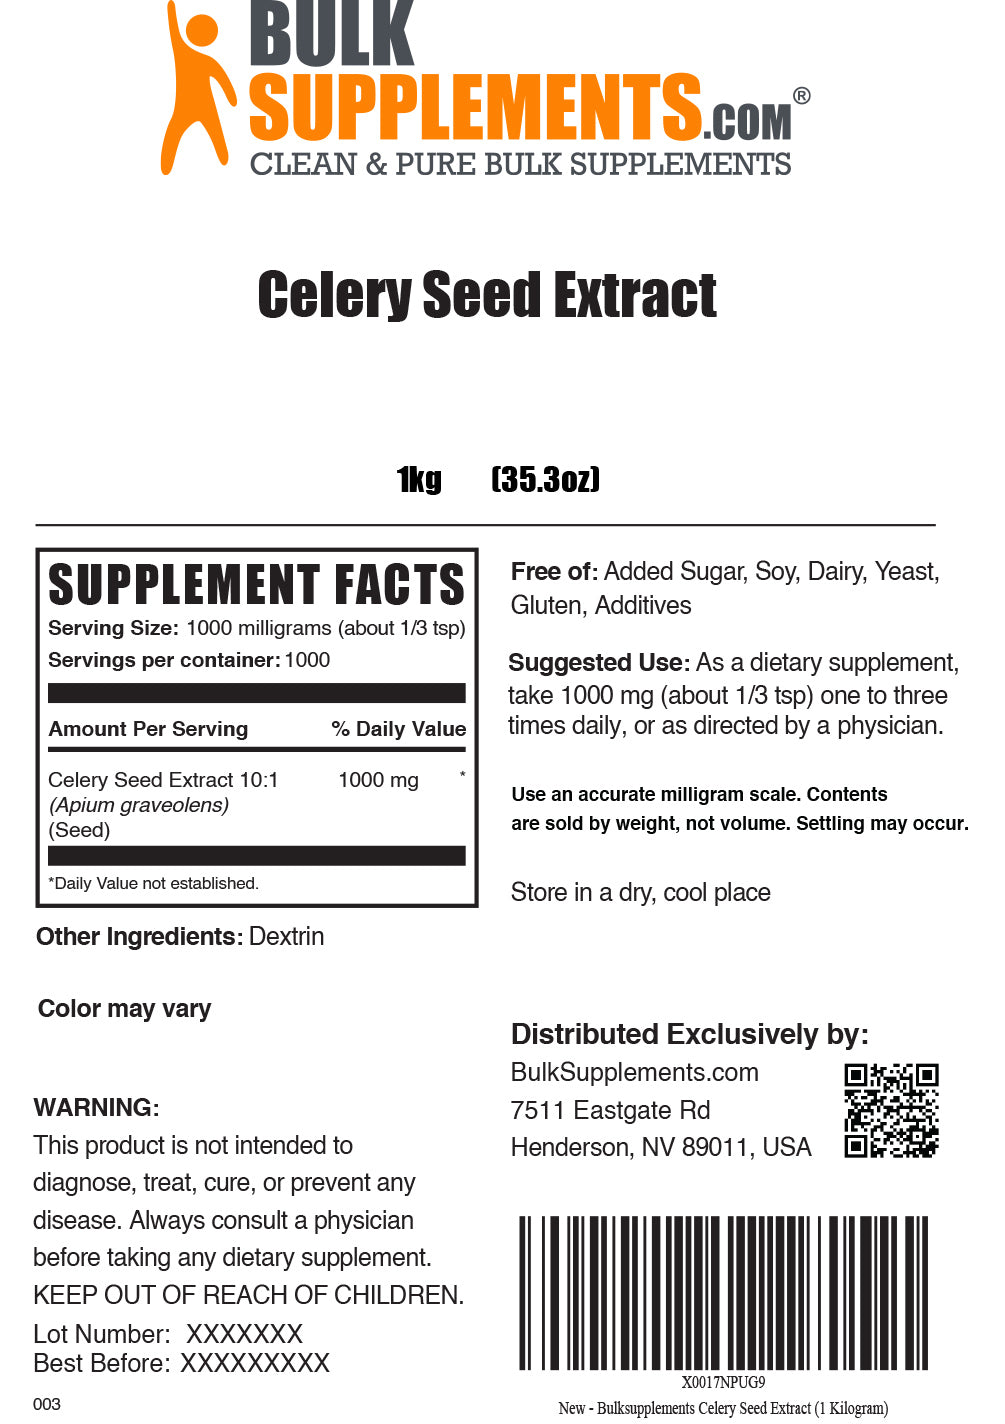 1kg celery seed extract supplement facts label